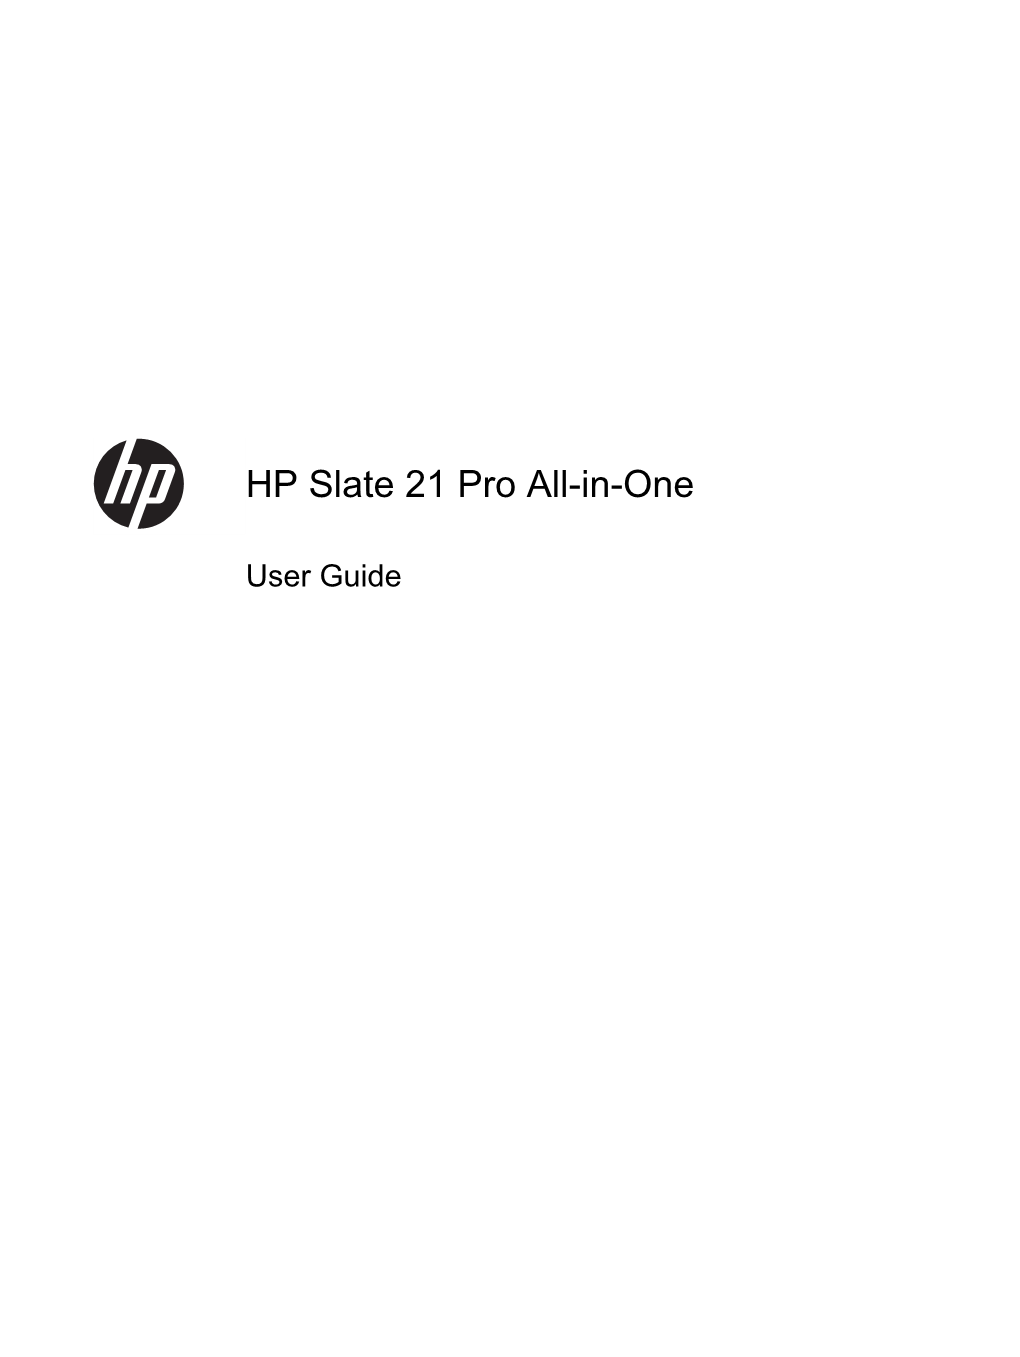 HP Slate 21 Pro All-In-One User Guide